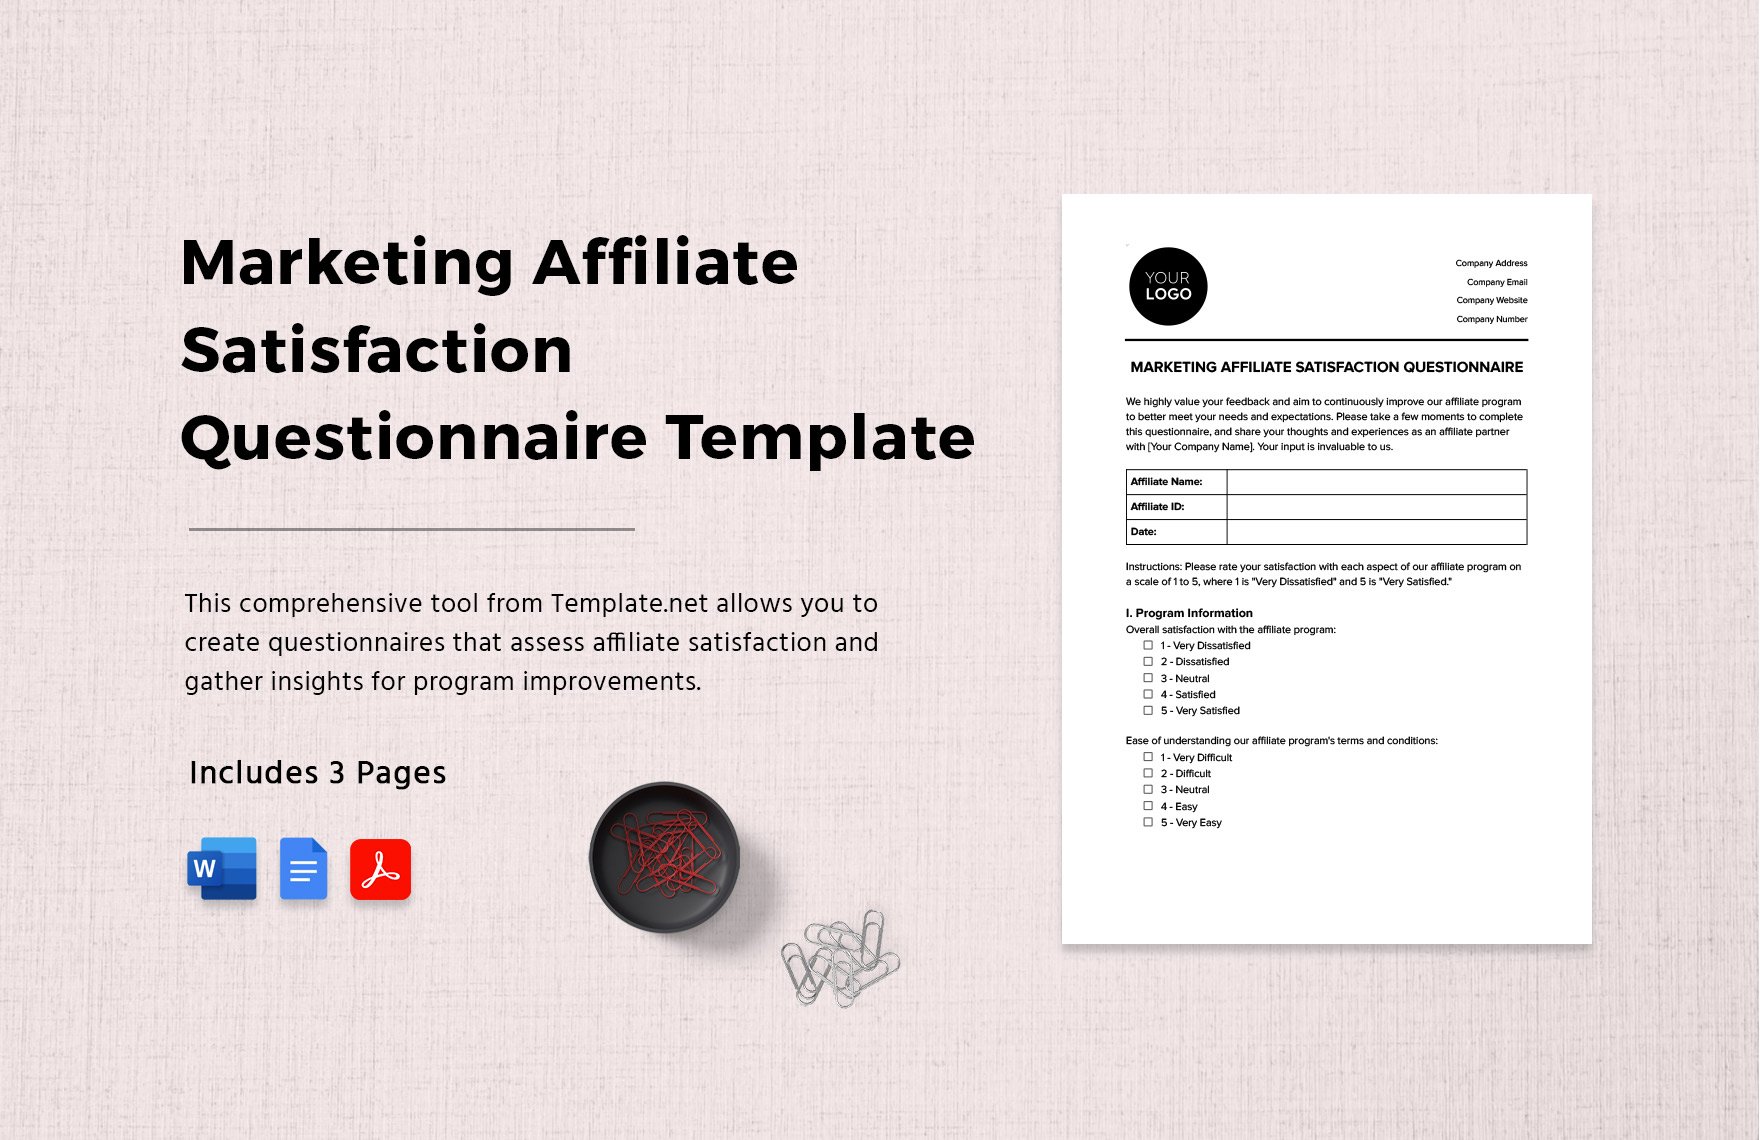 Marketing Affiliate Satisfaction Questionnaire Template in Word, Google Docs, PDF